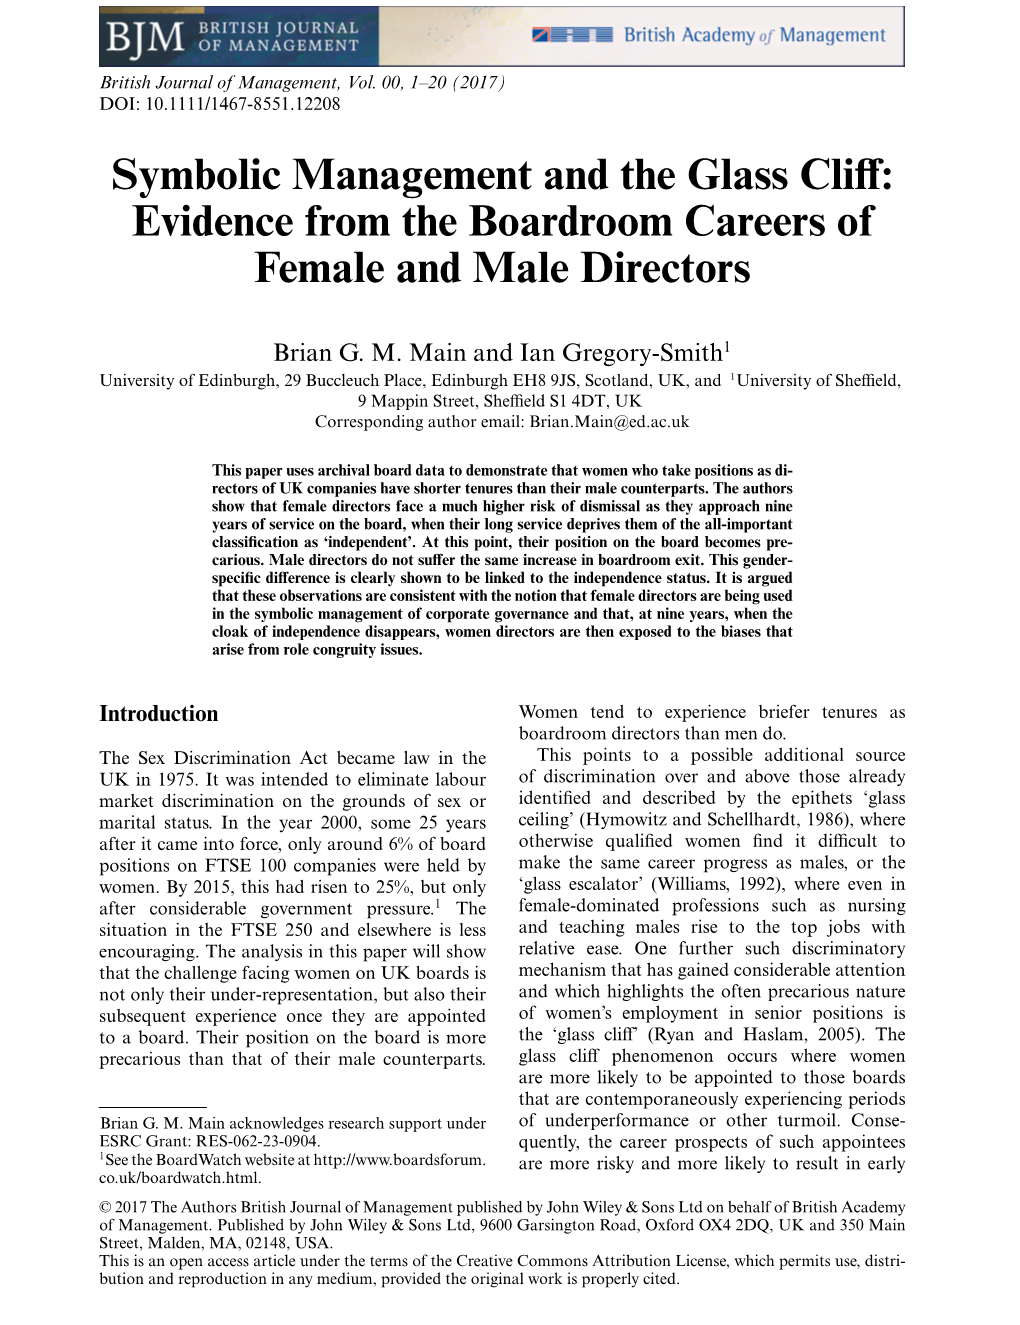 Symbolic Management and the Glass Cliff: Evidence from the Boardroom Careers of Female and Male Directors